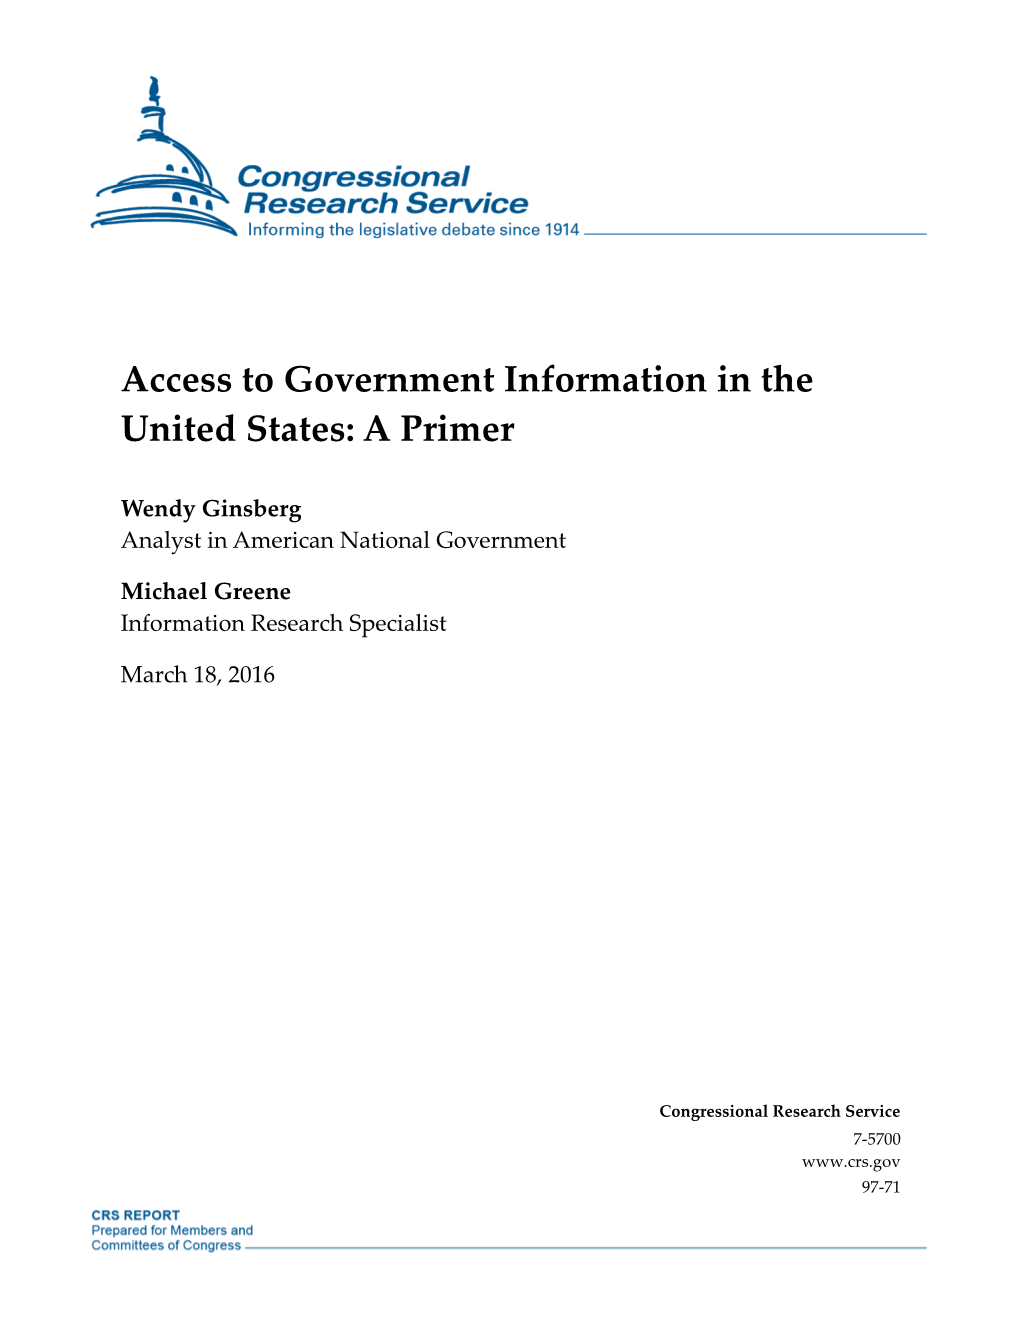 Access to Government Information in the United States: a Primer